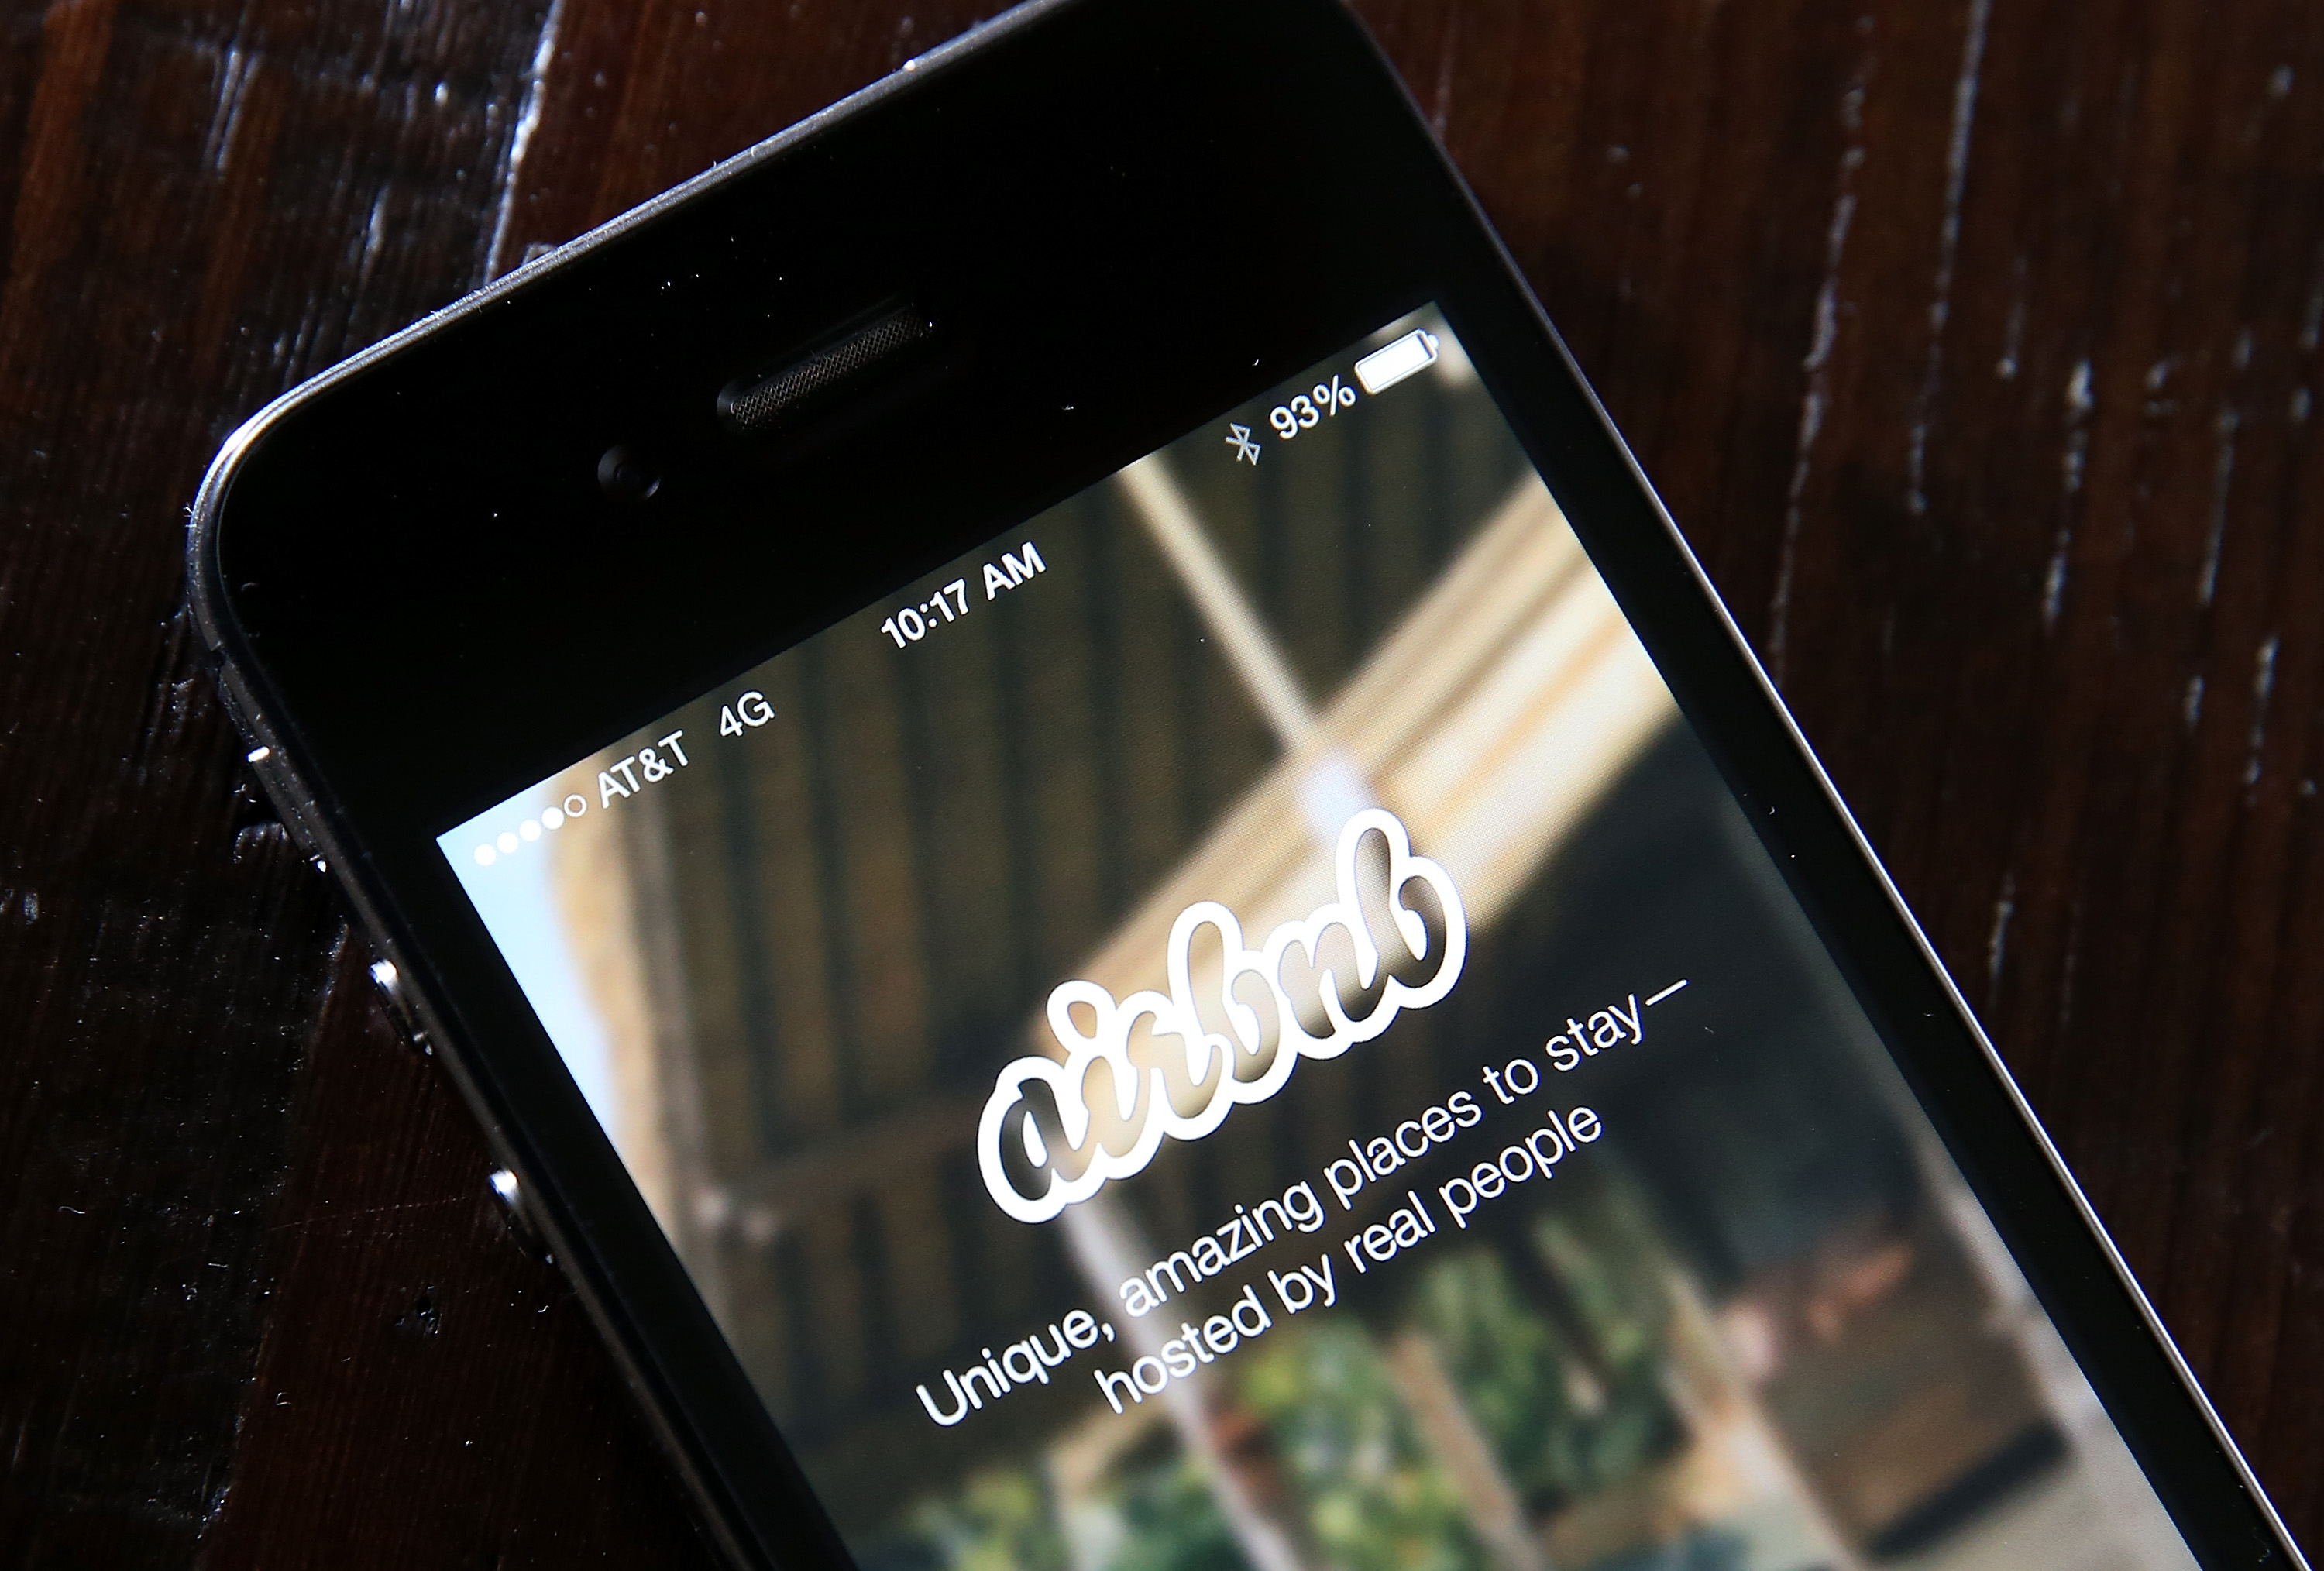 The Airbnb app is displayed on a smartphone on April 21, 2014 in San Anselmo, California. (Justin Sullivan—Getty Images)